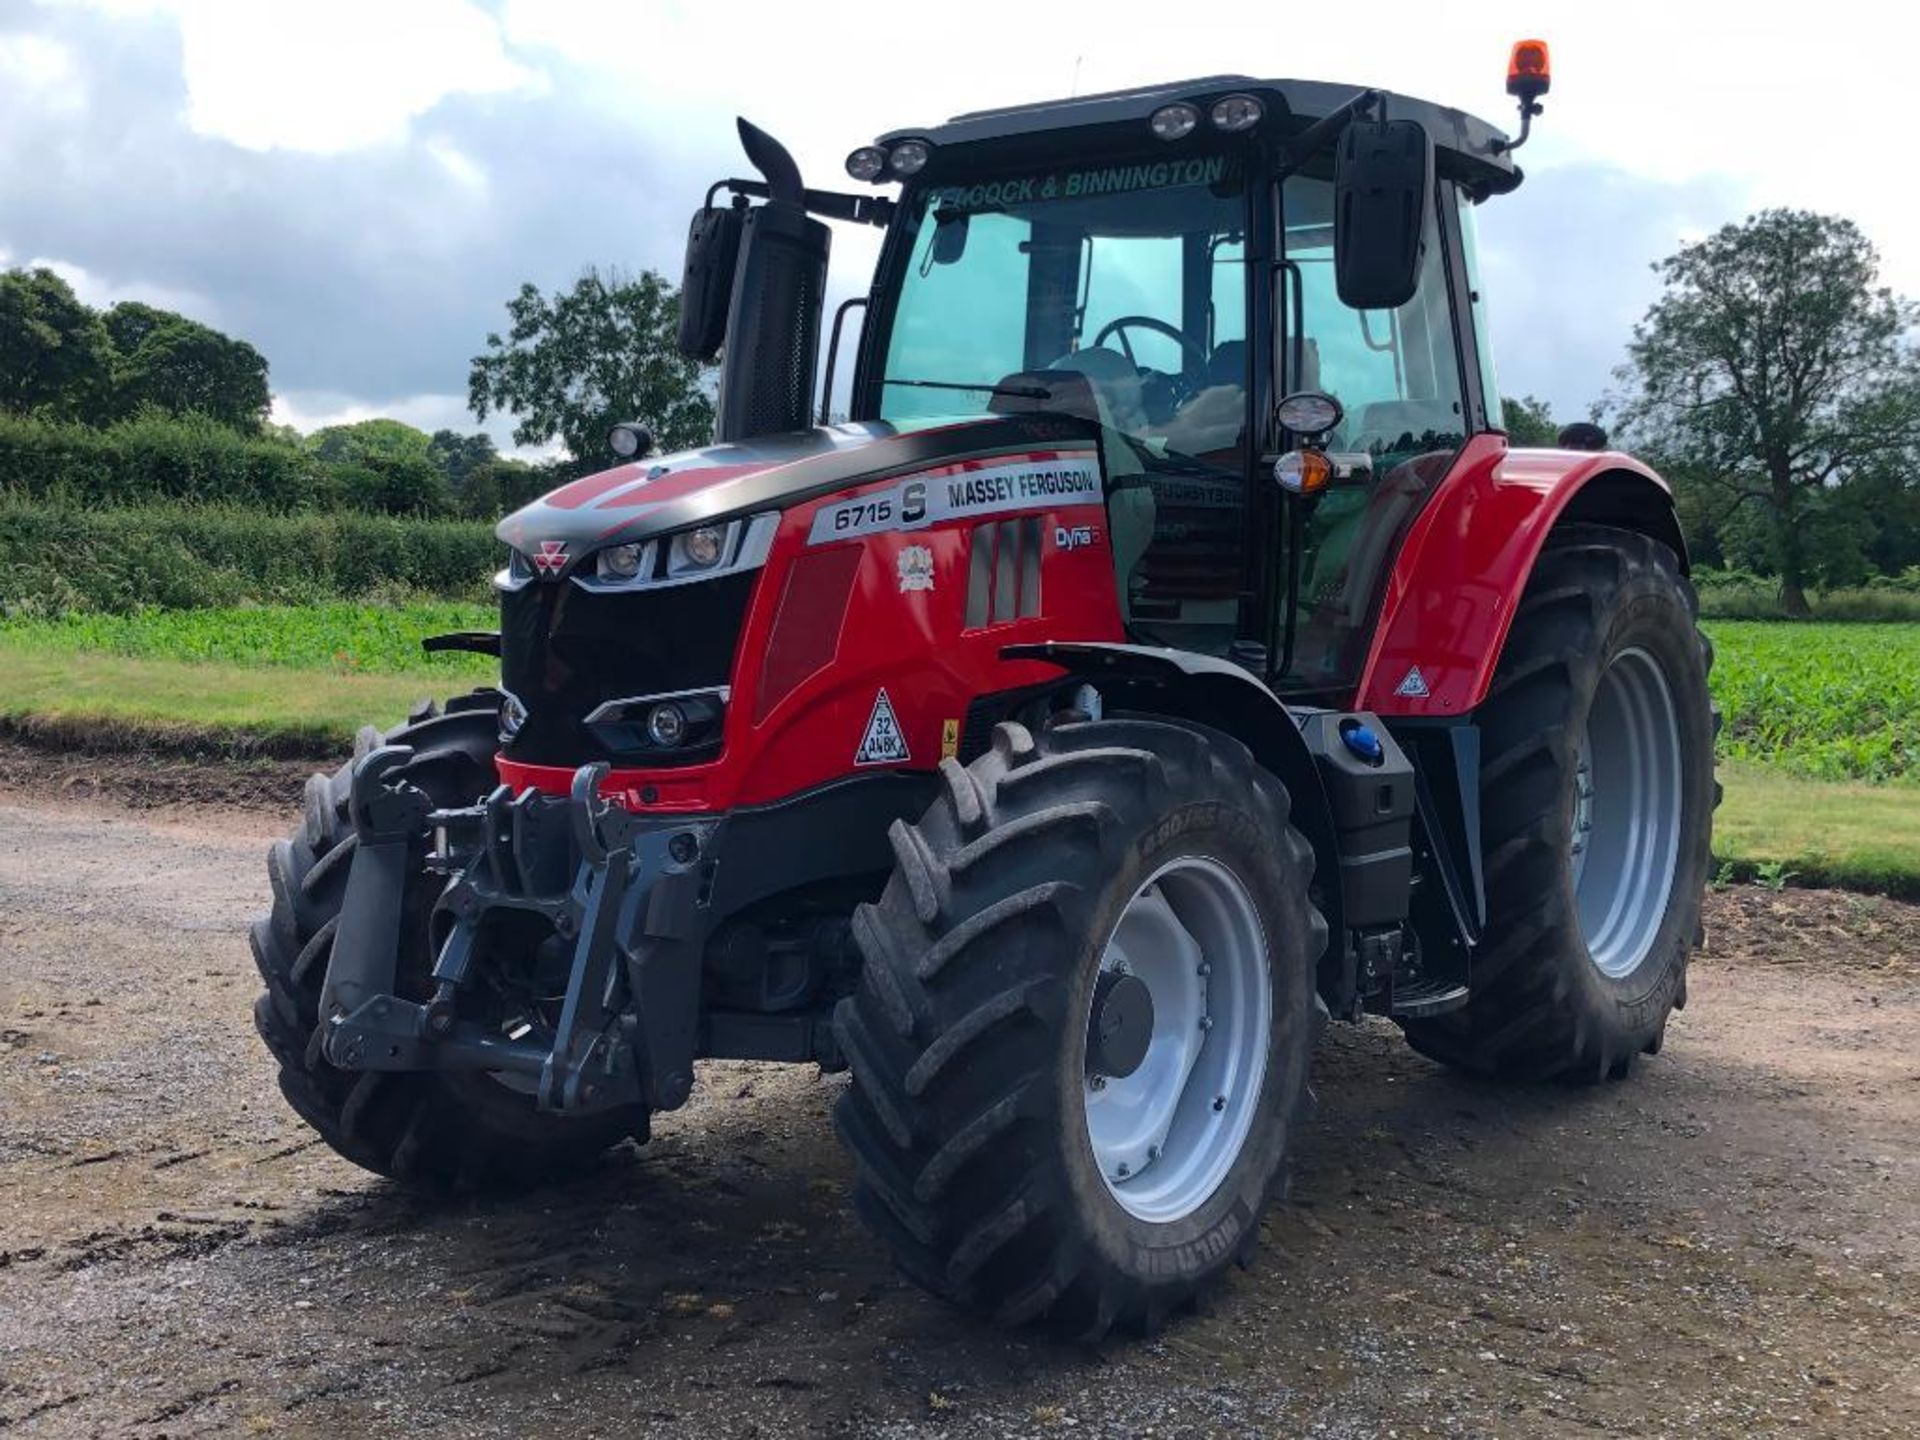 2019 Massey Ferguson 6715 S Dyna 6 50kph 4wd tractor c/w 3 manual spools, front linkage, air brakes, - Image 20 of 41